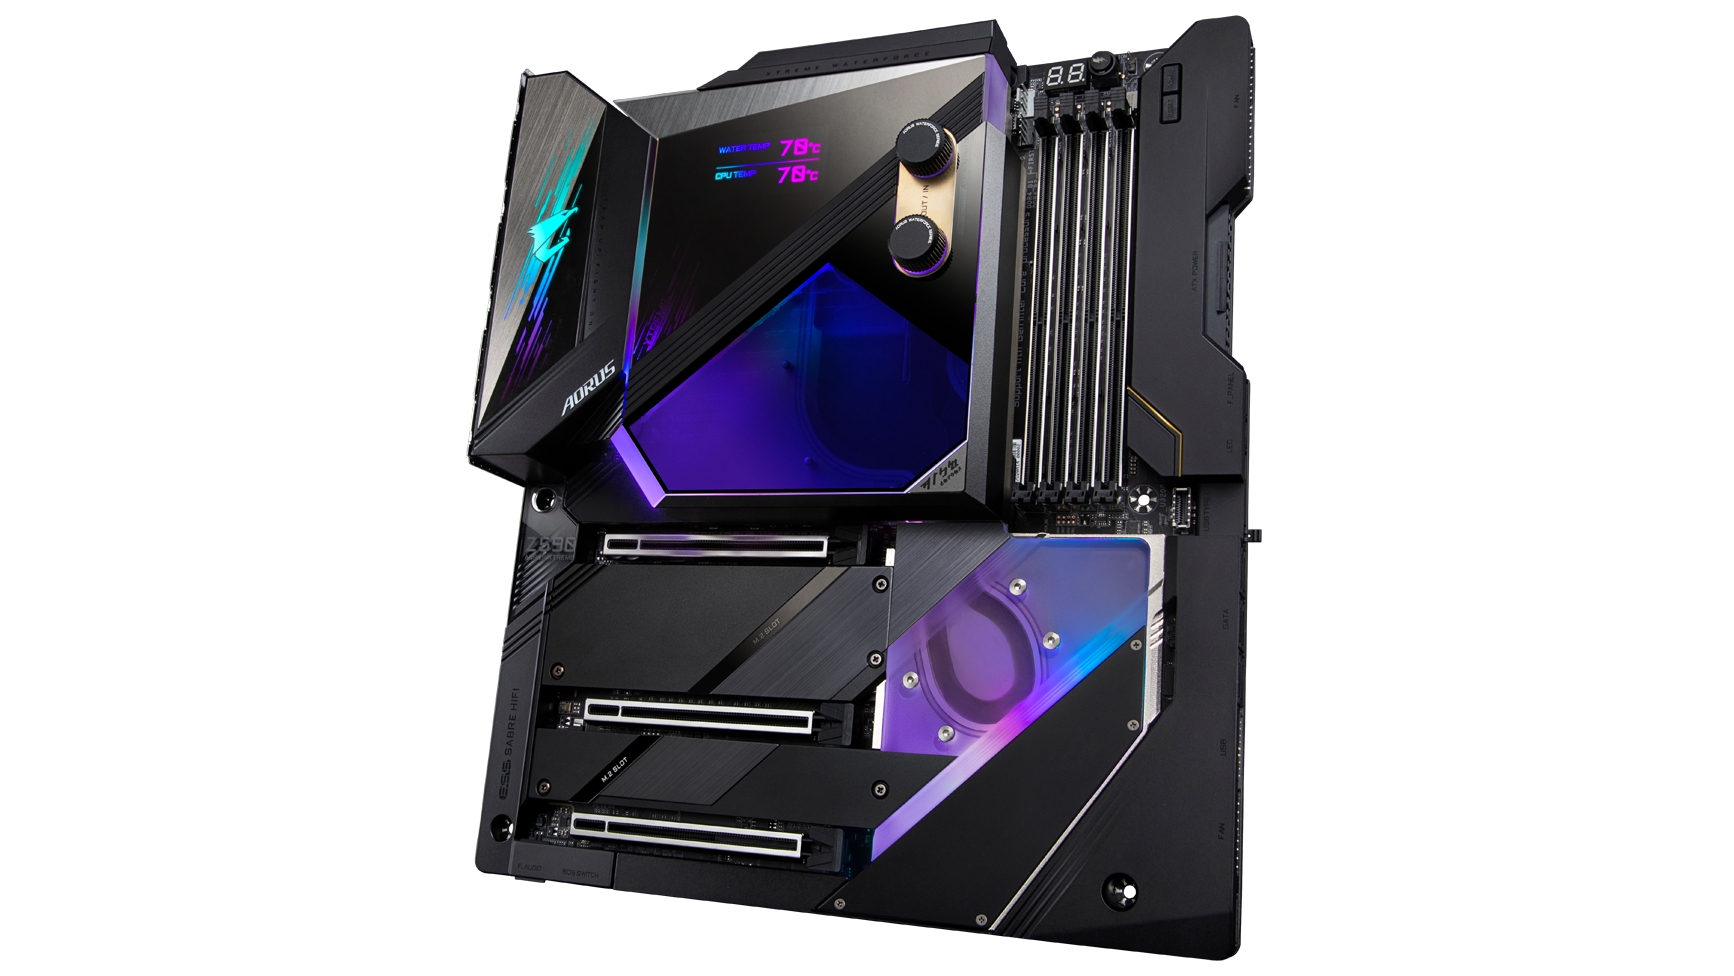 gigabyte’s-z590-aorus-waterforce-motherboard-overflows-with-features